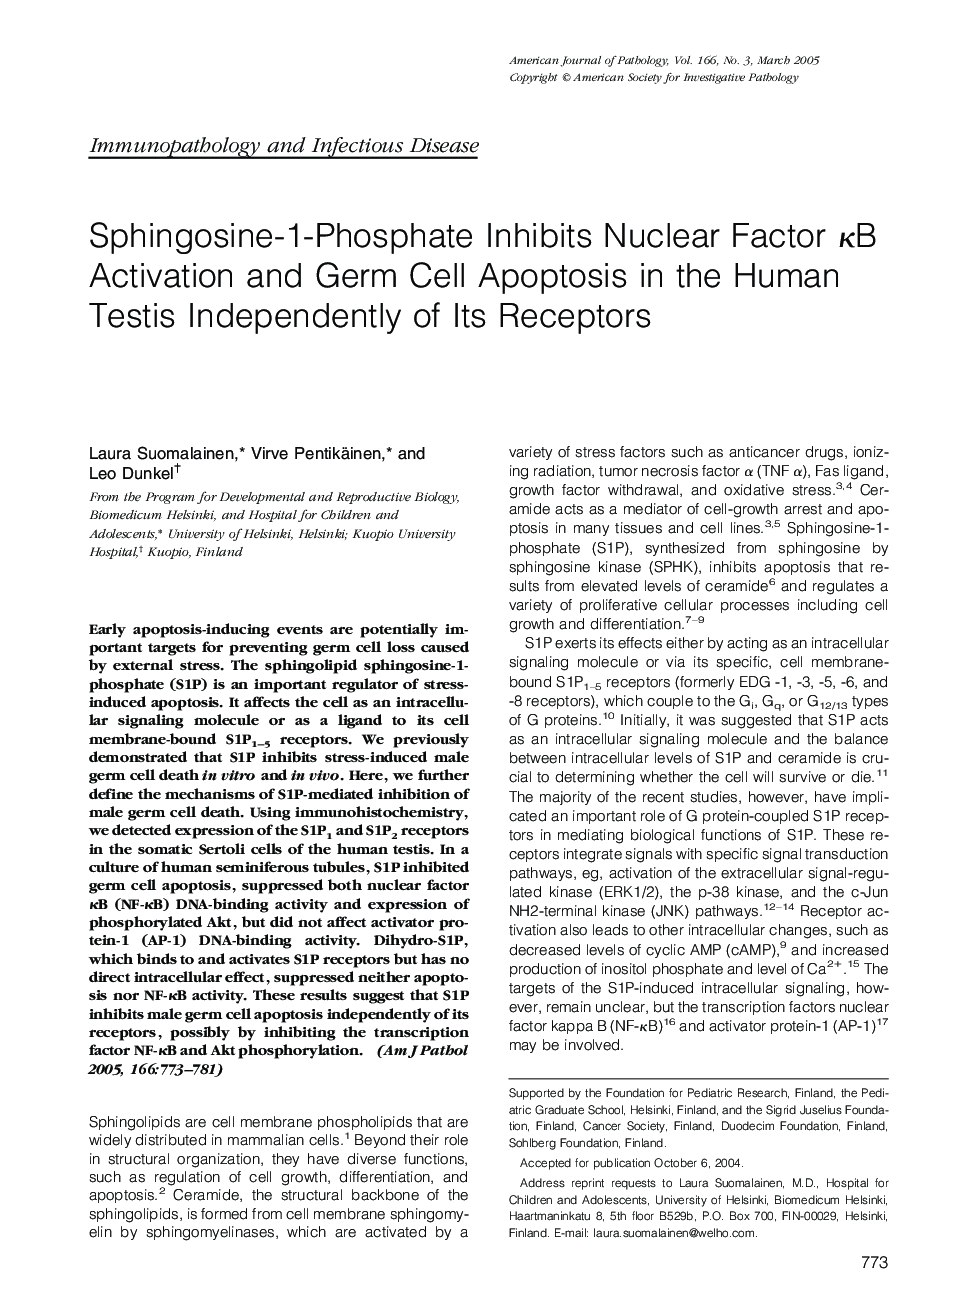 Sphingosine-1-Phosphate Inhibits Nuclear Factor ÎºB Activation and Germ Cell Apoptosis in the Human Testis Independently of Its Receptors